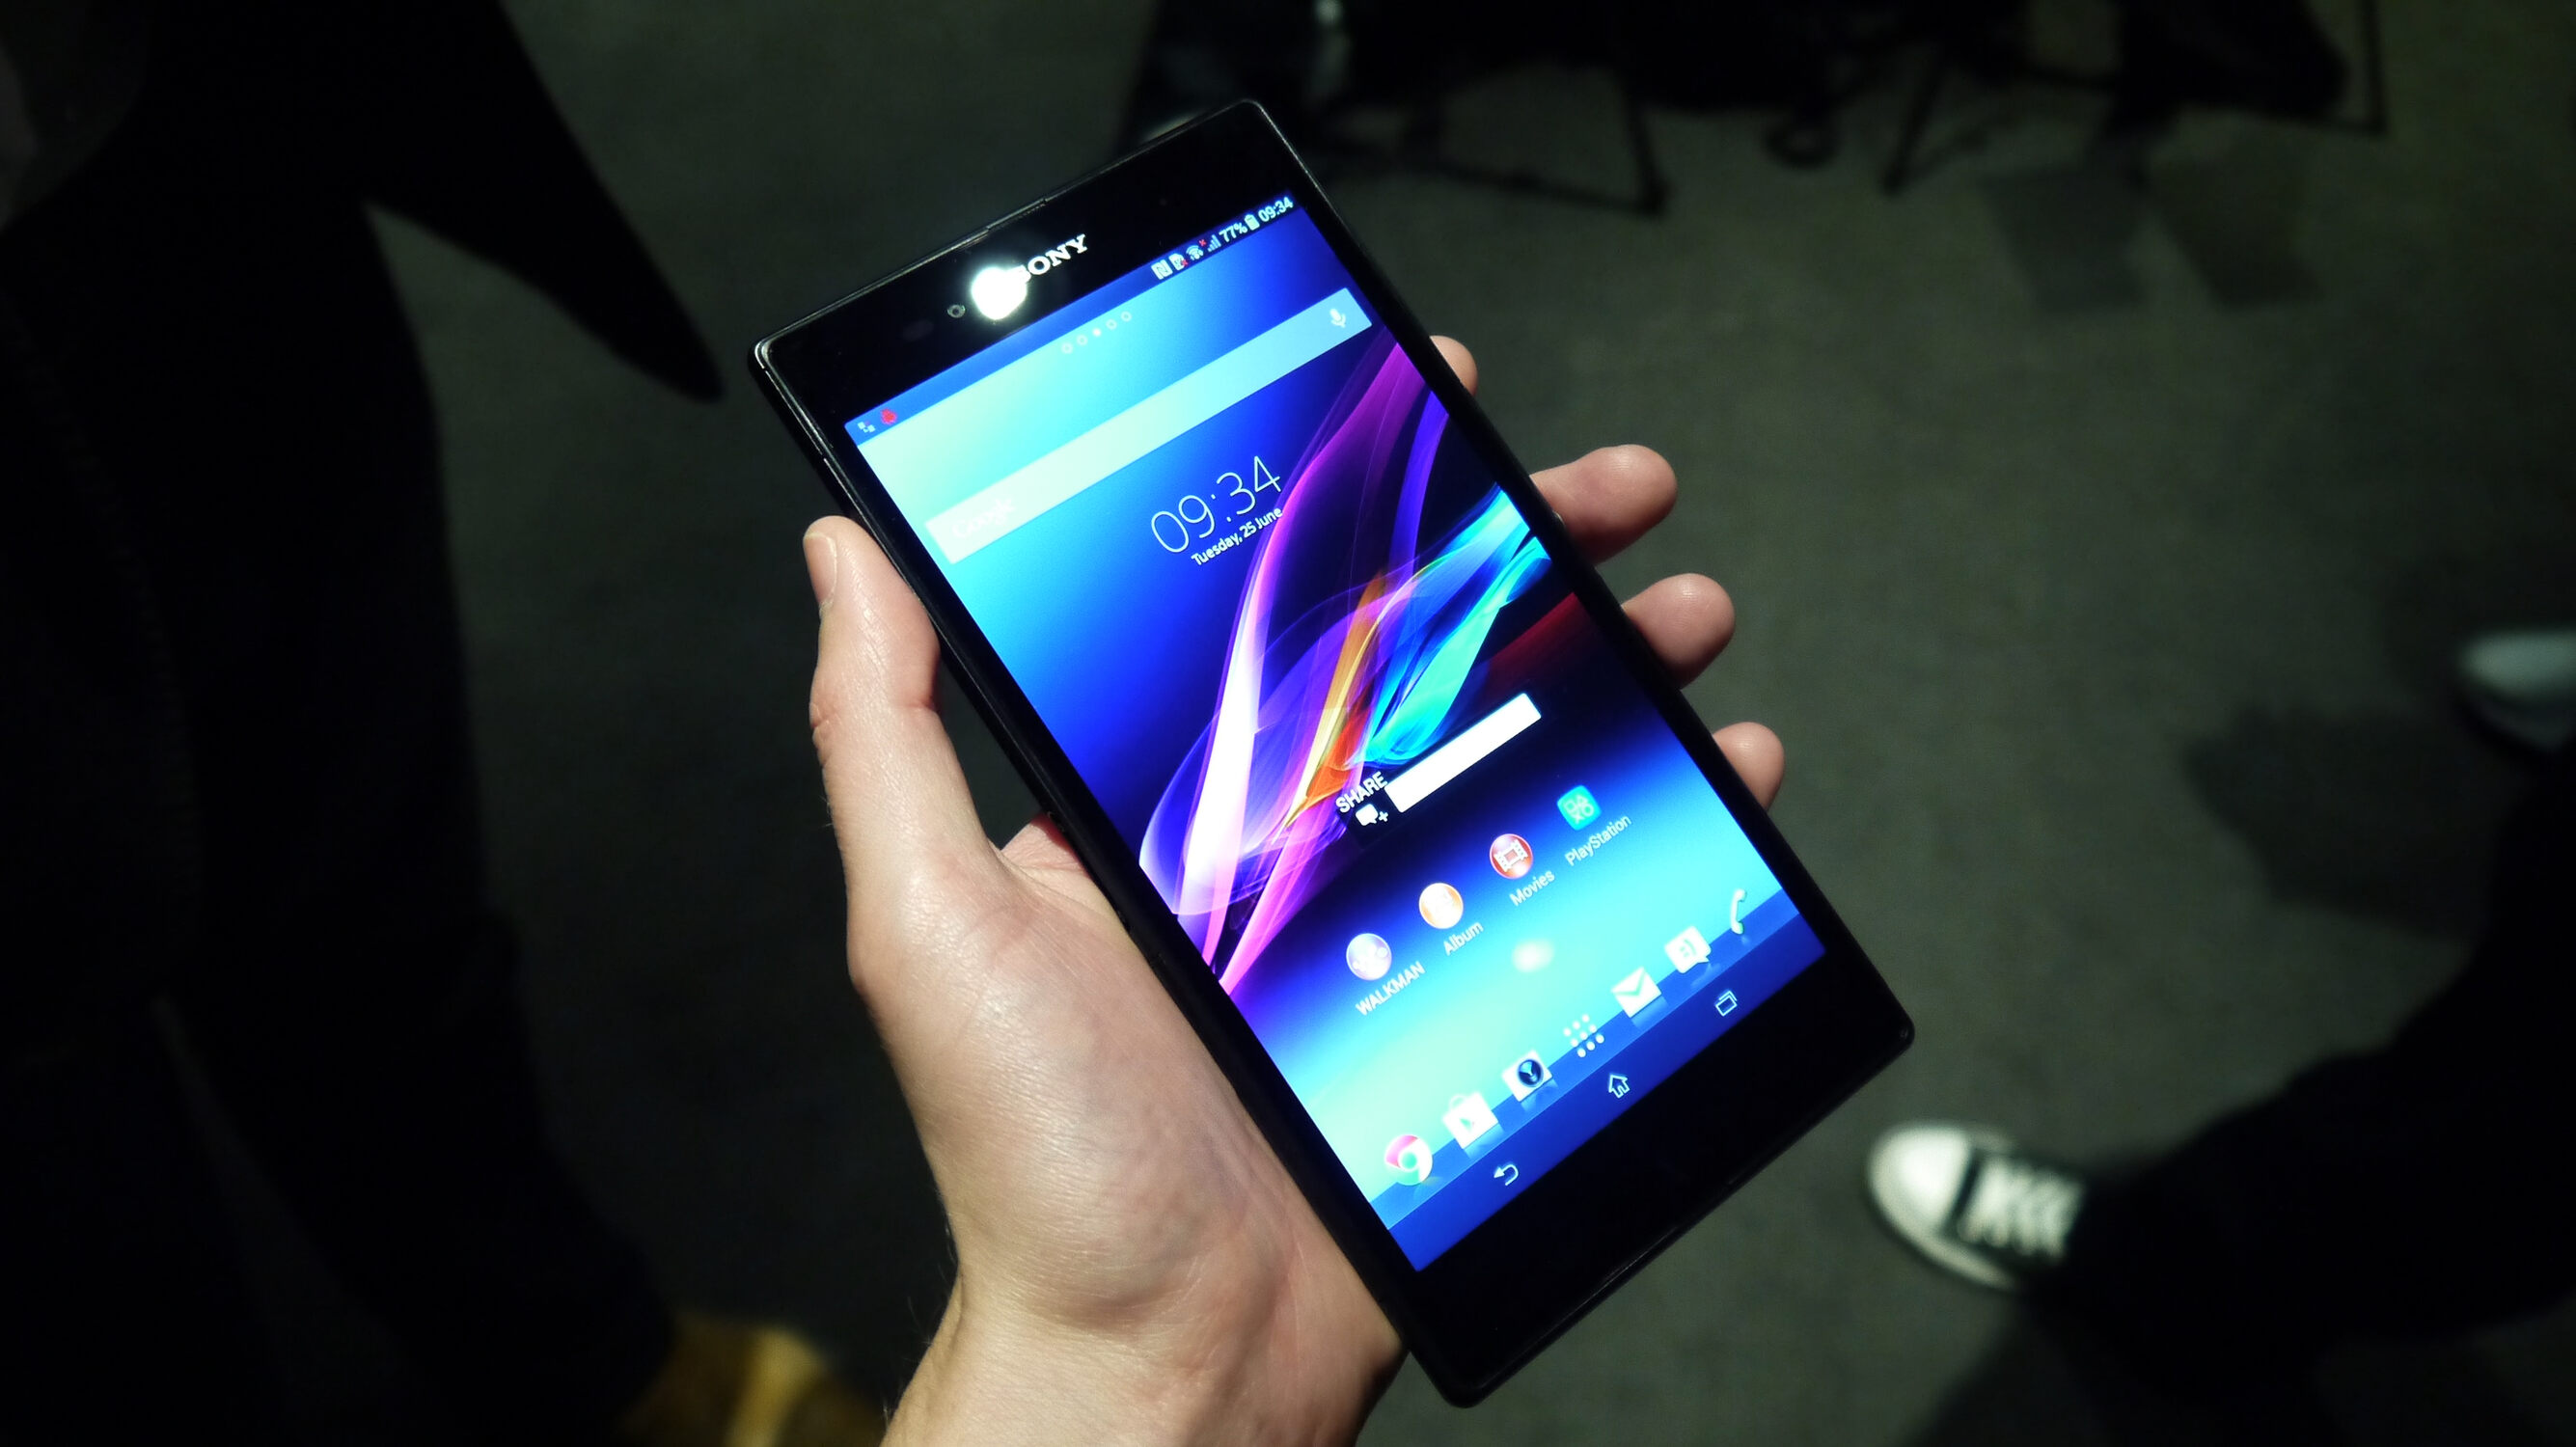 Unlocking Bootloader: A Step-by-Step Guide For Xperia Z Ultra